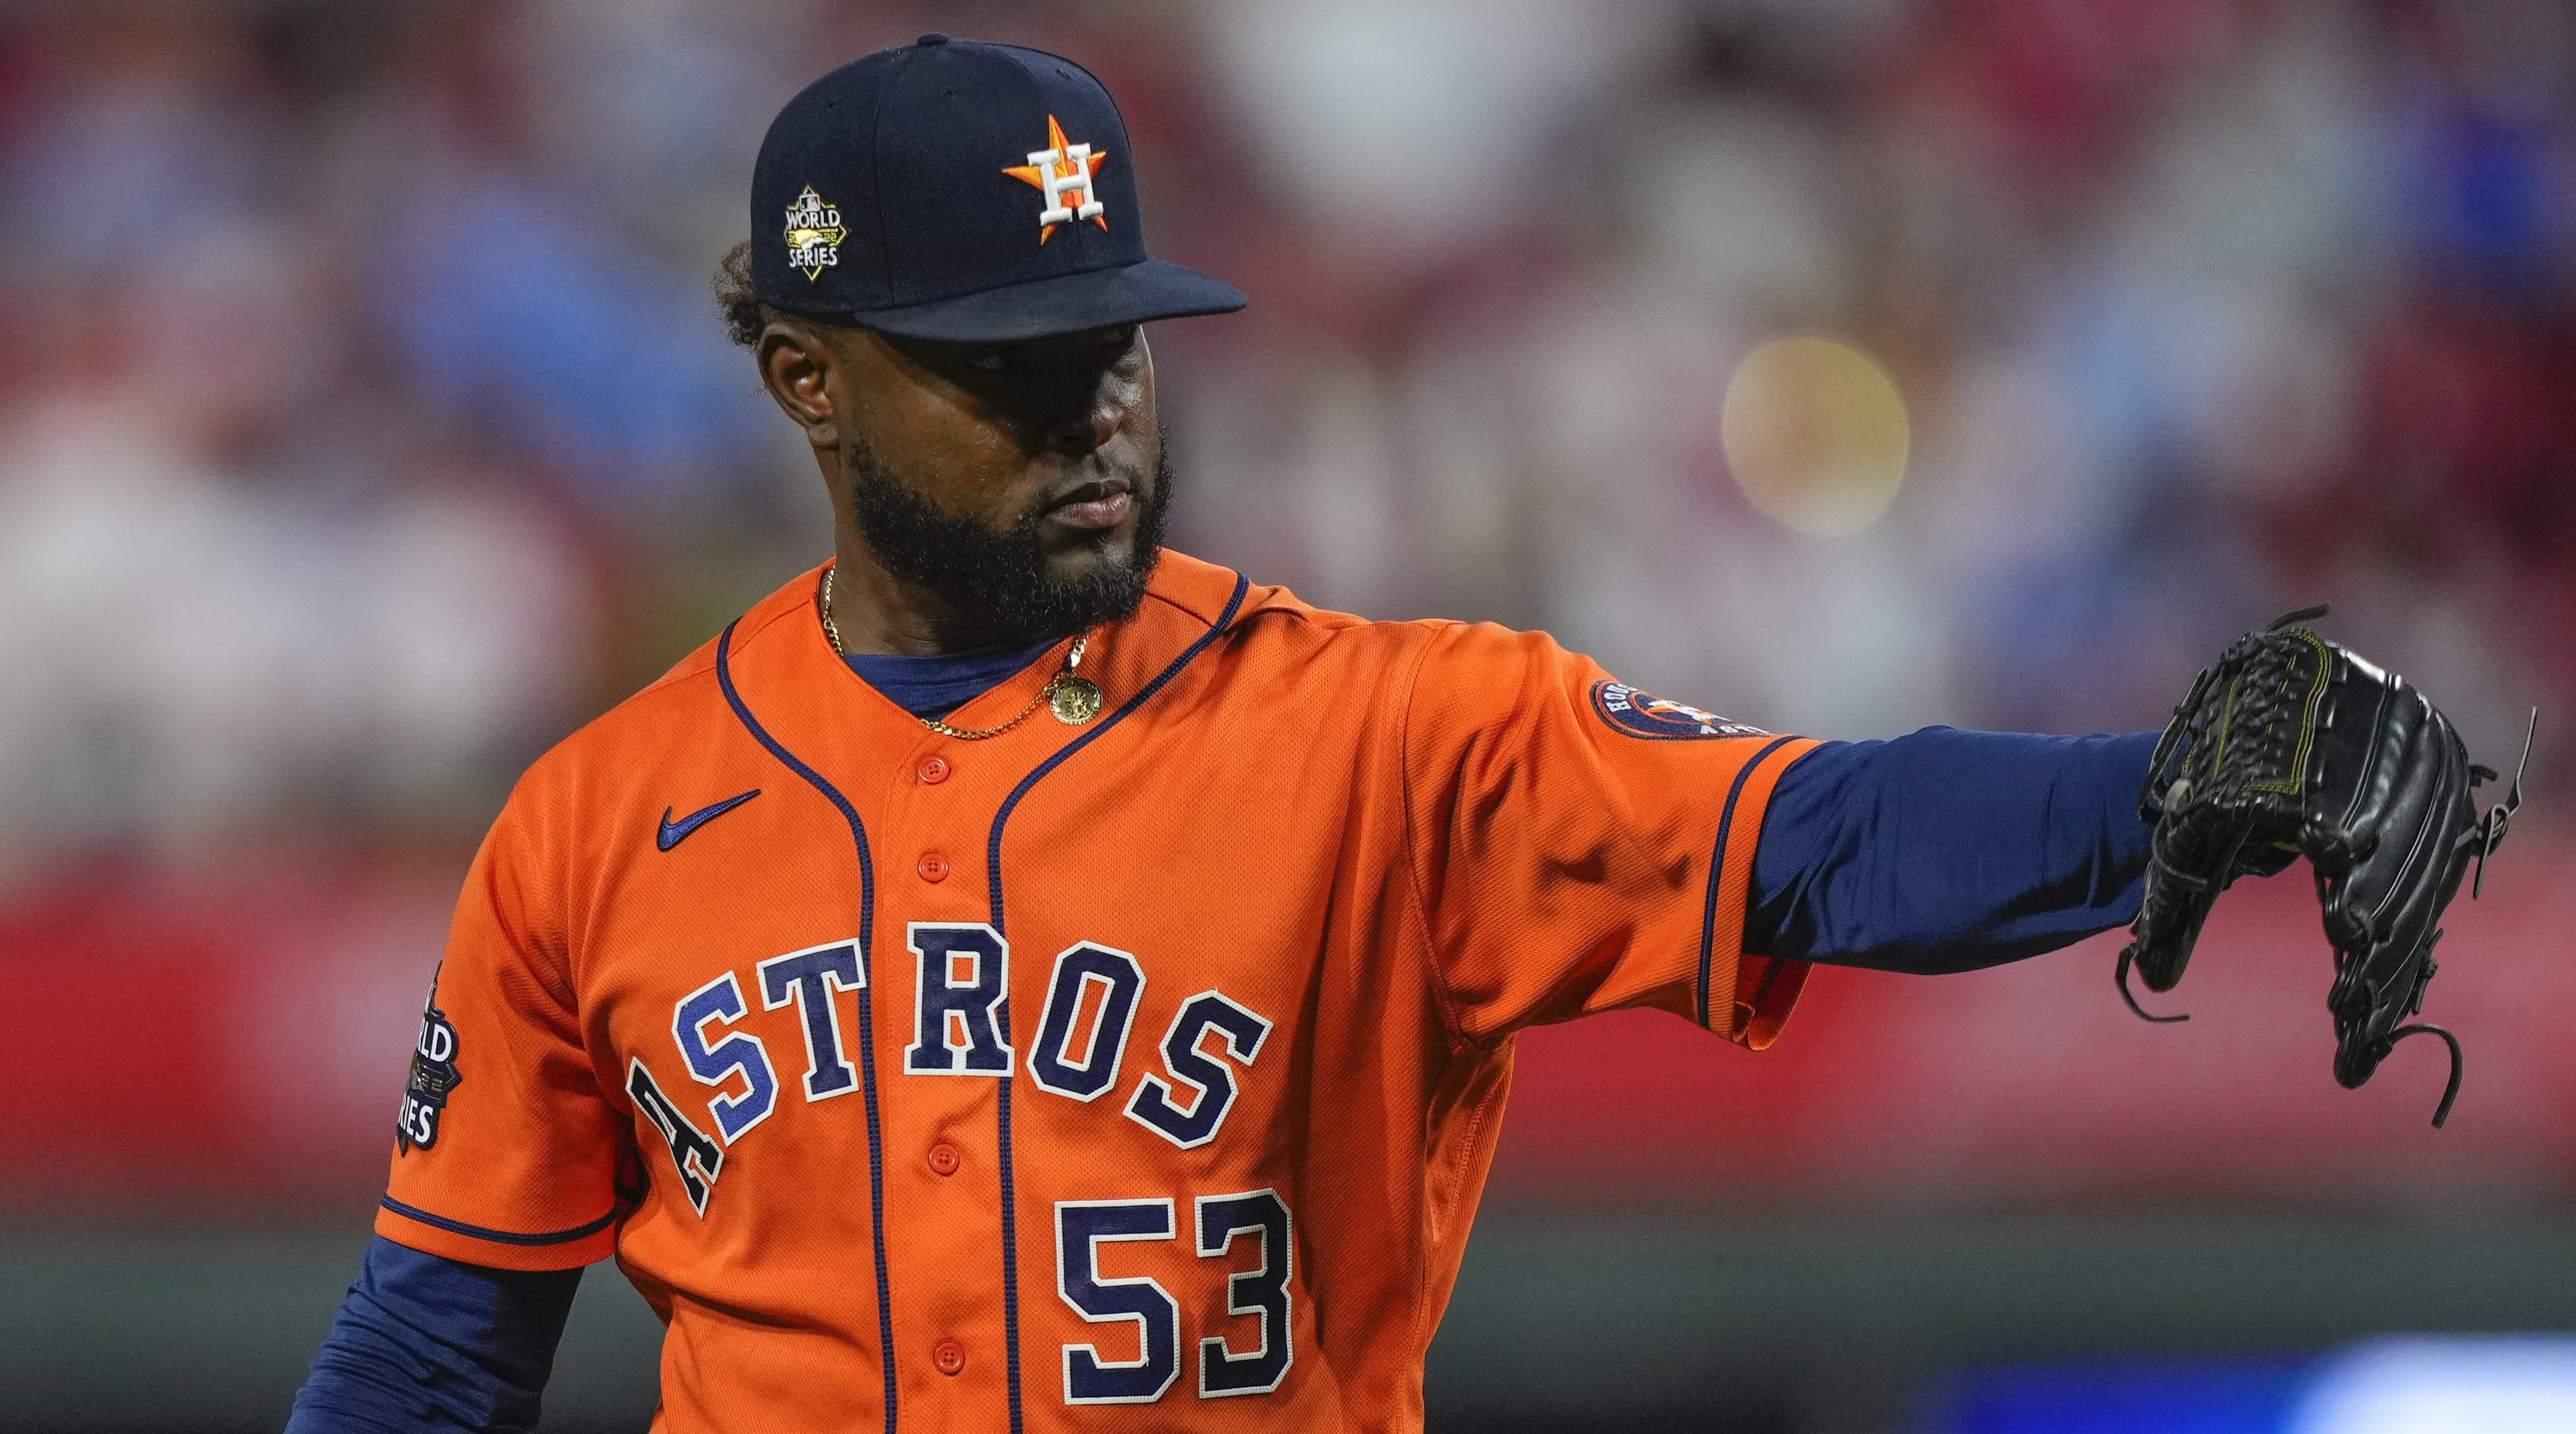 Cristian Javier honored to get ball in Astros home opener